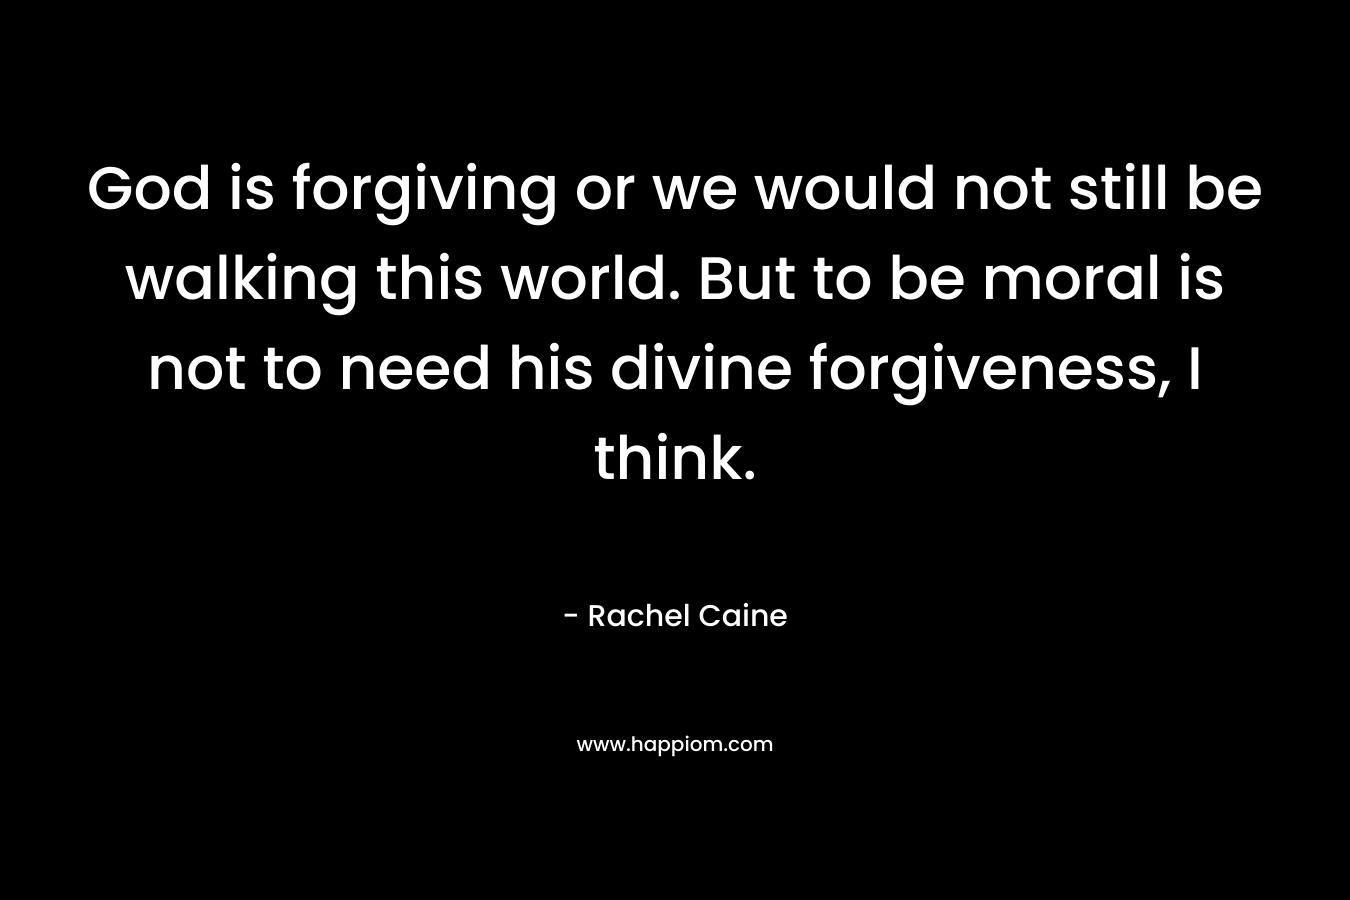 God is forgiving or we would not still be walking this world. But to be moral is not to need his divine forgiveness, I think.